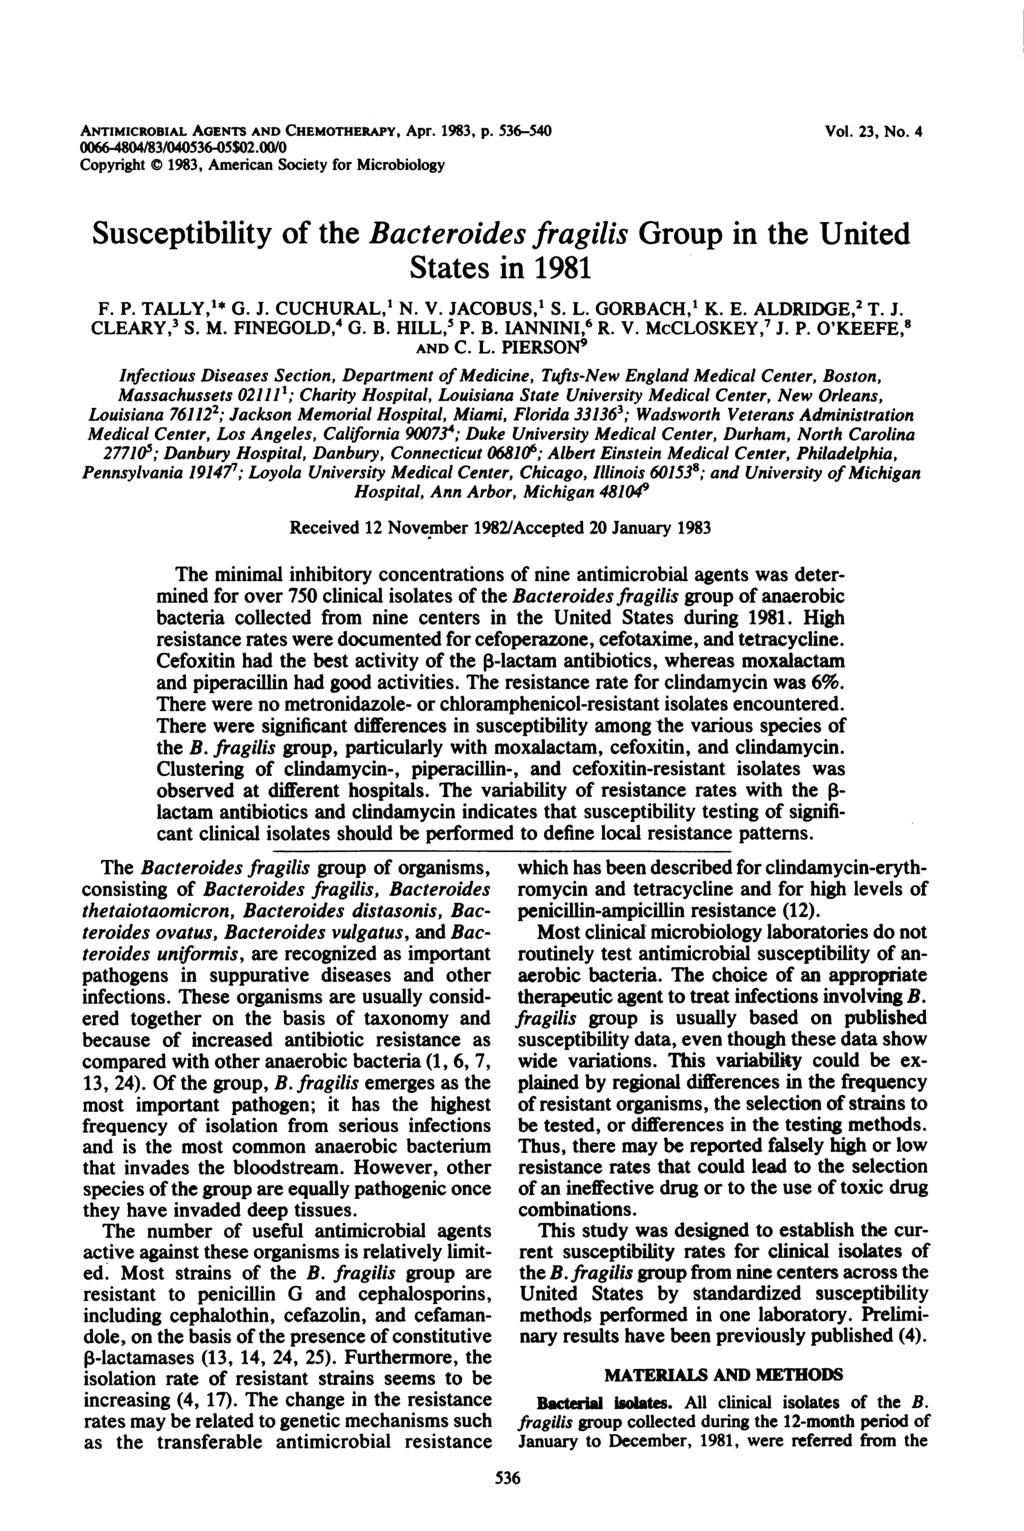 ANTIMICROBIAL AGENTS AND CHEMOTHERPY, Apr. 1983, p. 536-540 0066-4804/83/040536-05$02.0O/0 Copyright C 1983, American Society for Microbiology Vol. 23, No.